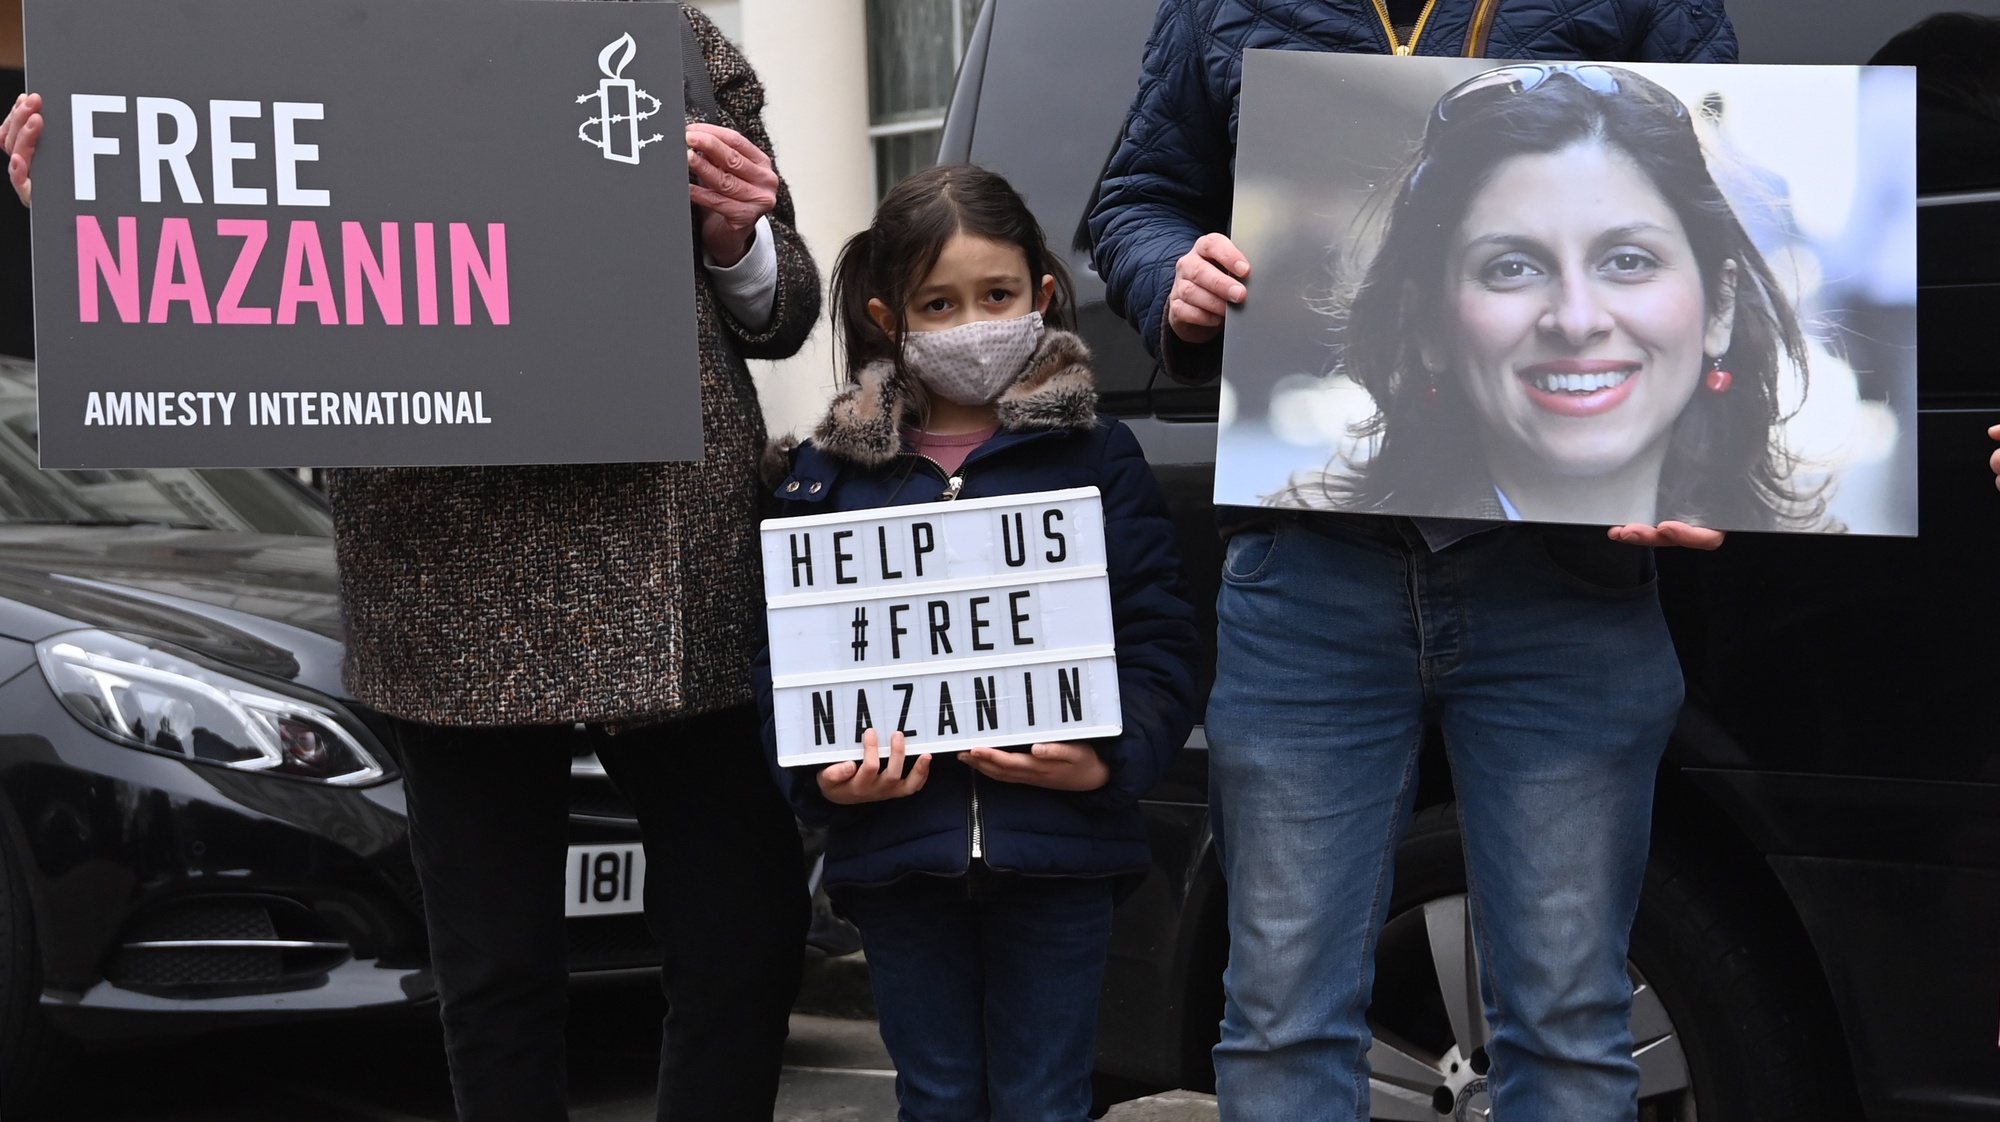 epa09061576 Nazanin Zaghari-Ratcliffe&#039;s daughter Gabriella protests outside the Iranian Embassy in London, Britain, 08 March 2021. Nazanin Zaghari-Ratcliffe was due to be released on 07 March after serving a five year jail term in Iran for alleged spying, a claim which she denies.  EPA/FACUNDO ARRIZABALAGA